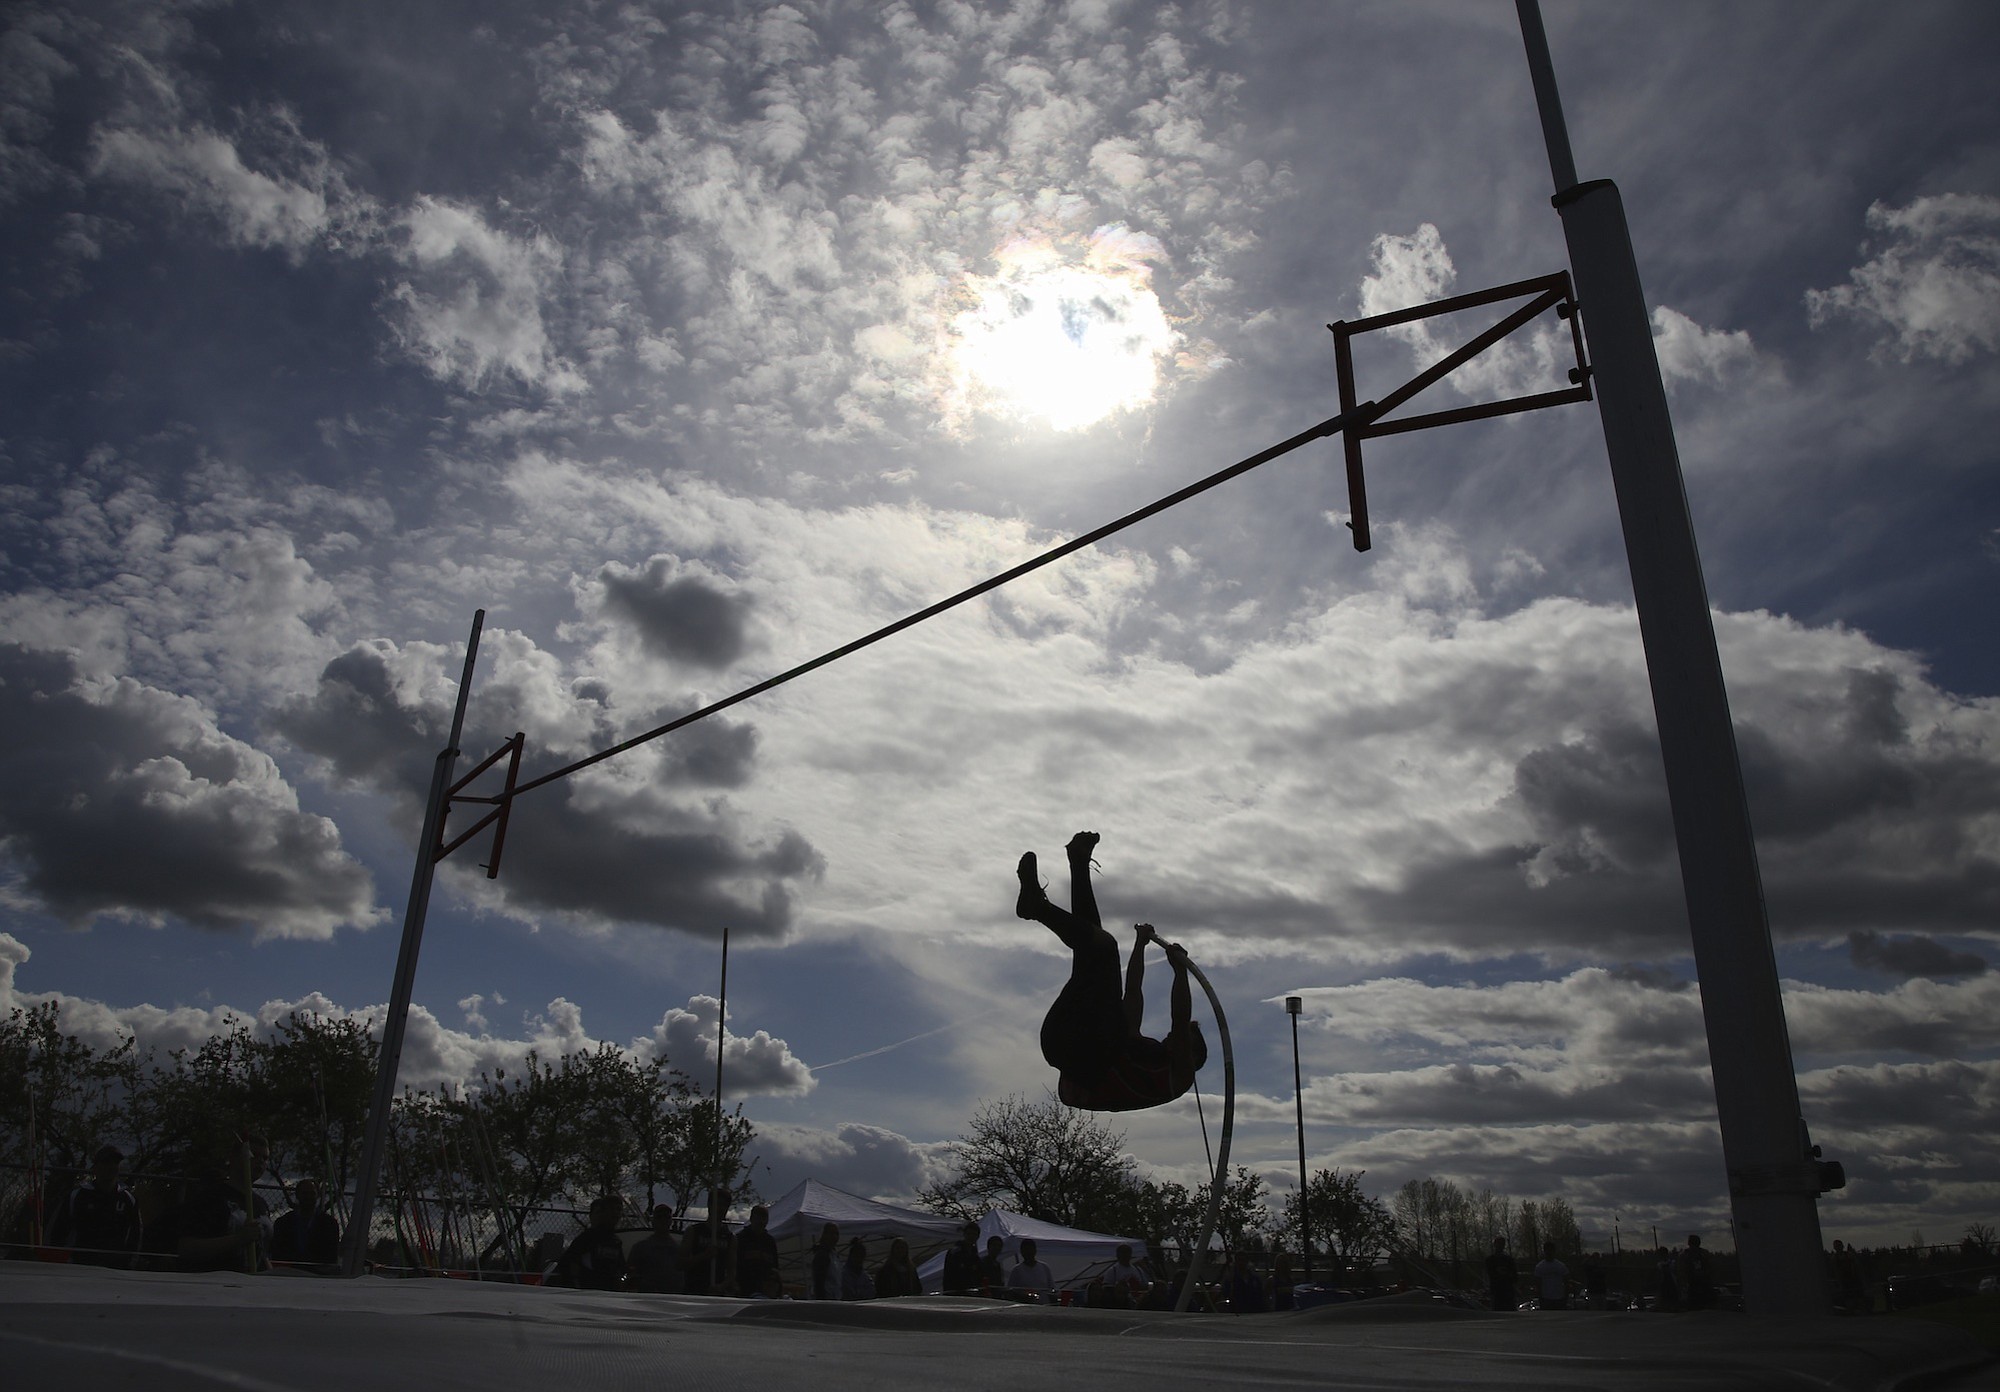 Boy's pole vault at the Tiger Invitational track and field meet at Battle Ground high school.(Steve Dipaola for the Columbian)